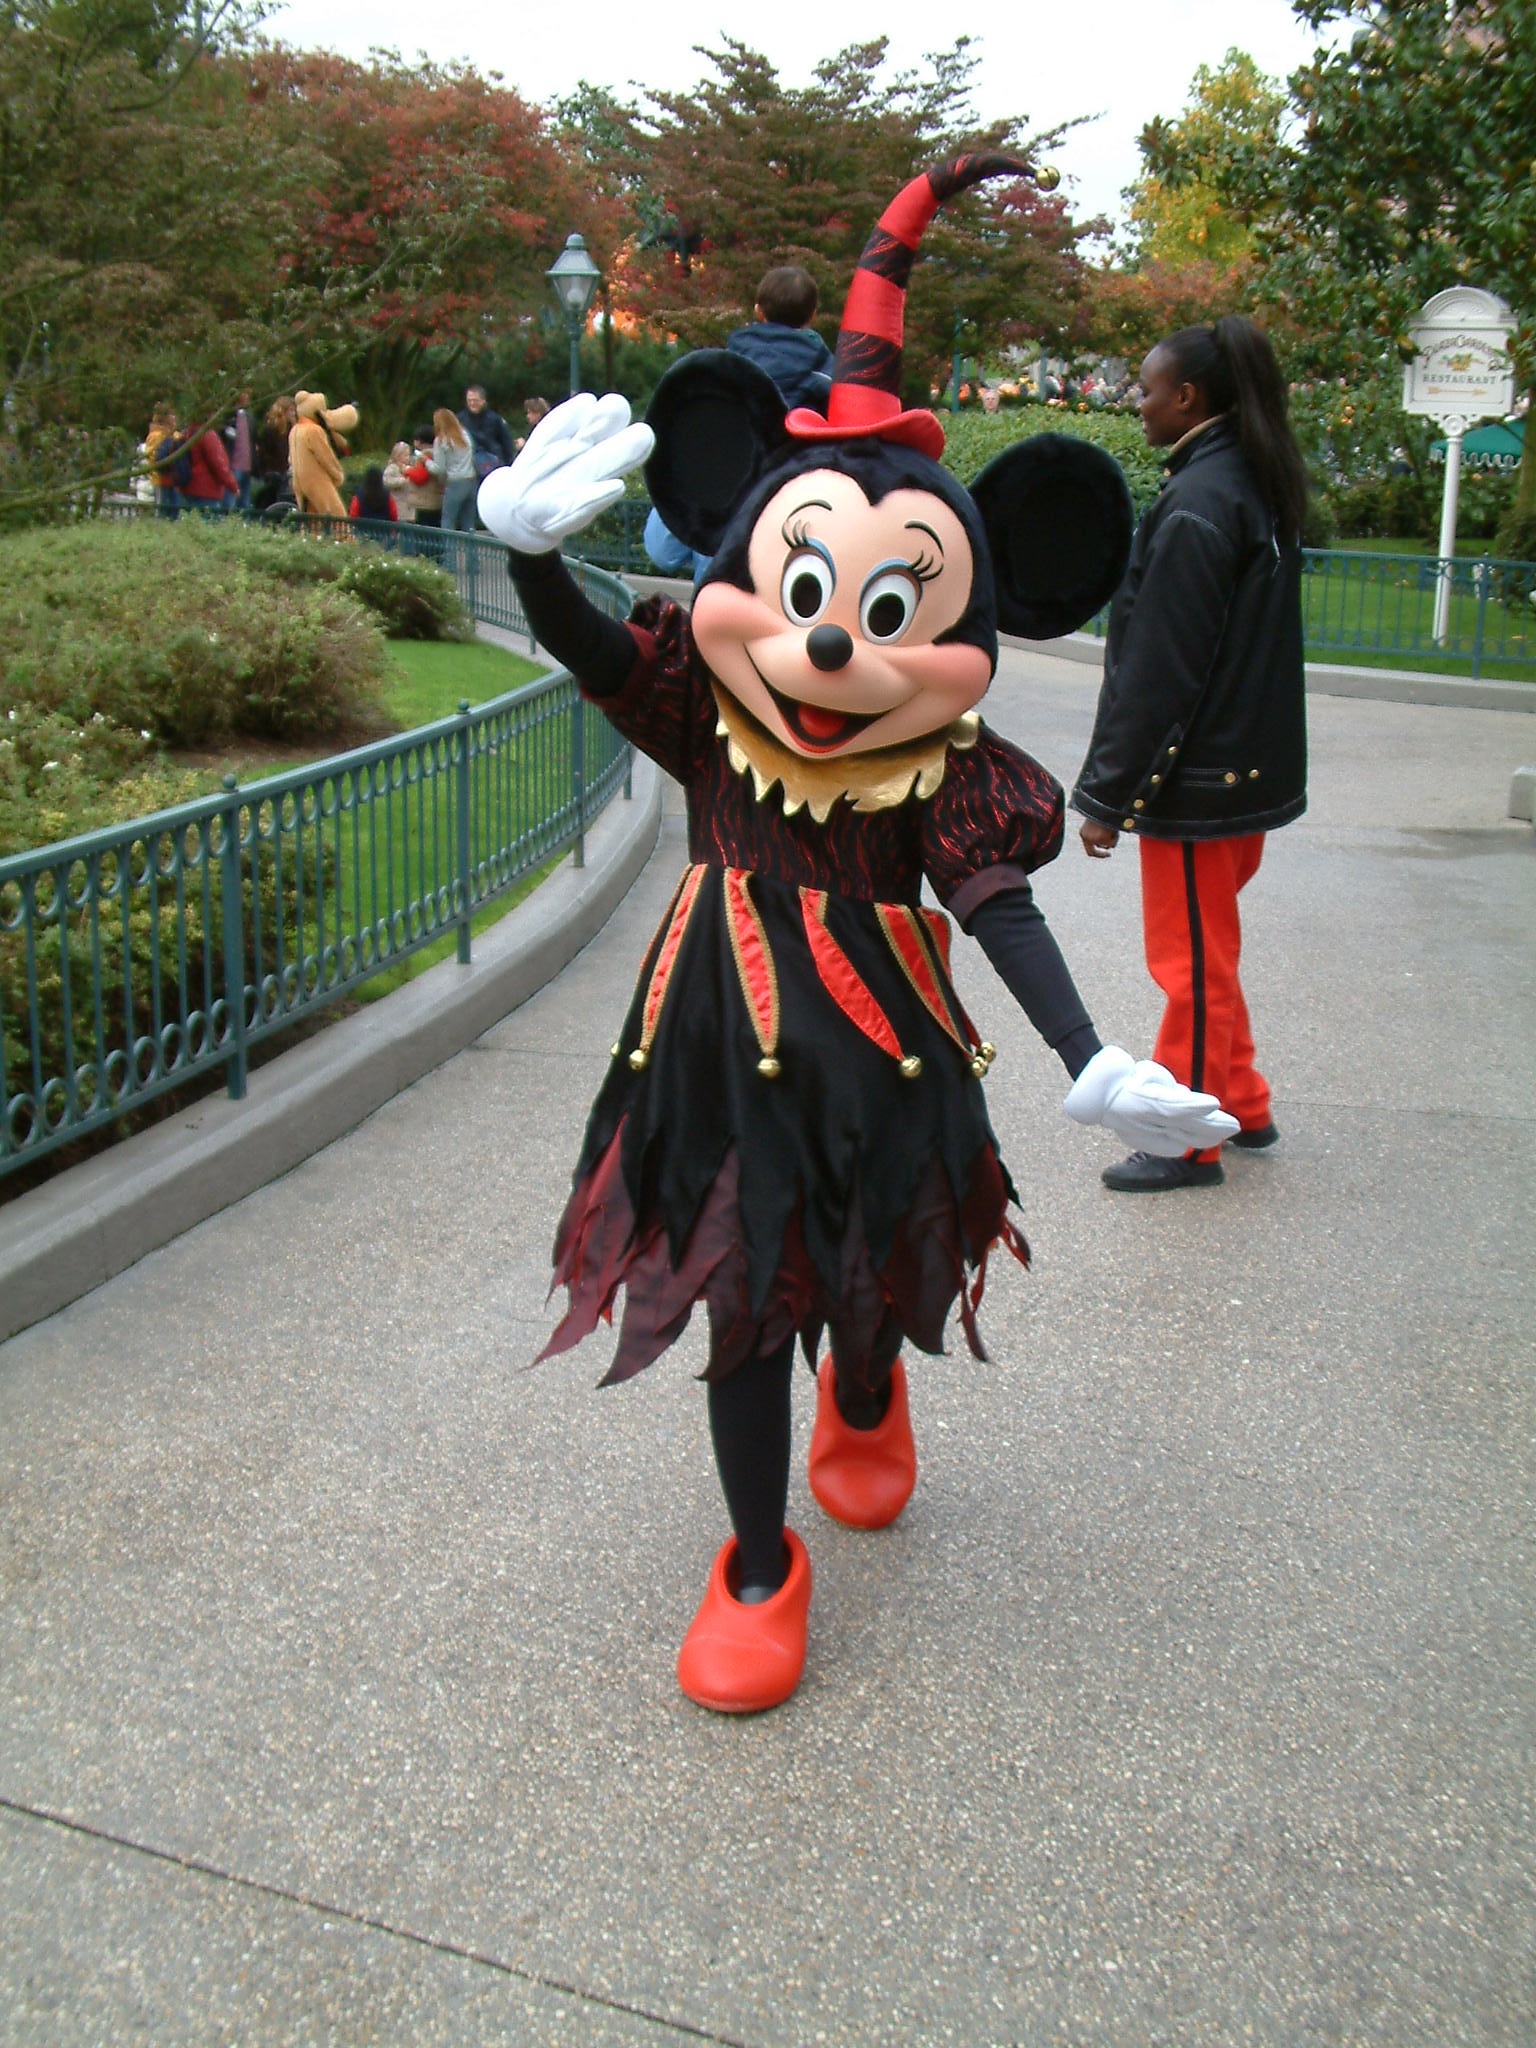 Before any other Halloween outfit, Minnie was wearing this witch outfit for Halloween. Nowadays you can only meet her in this outfit at the Resort Hotels, but it still is rare.